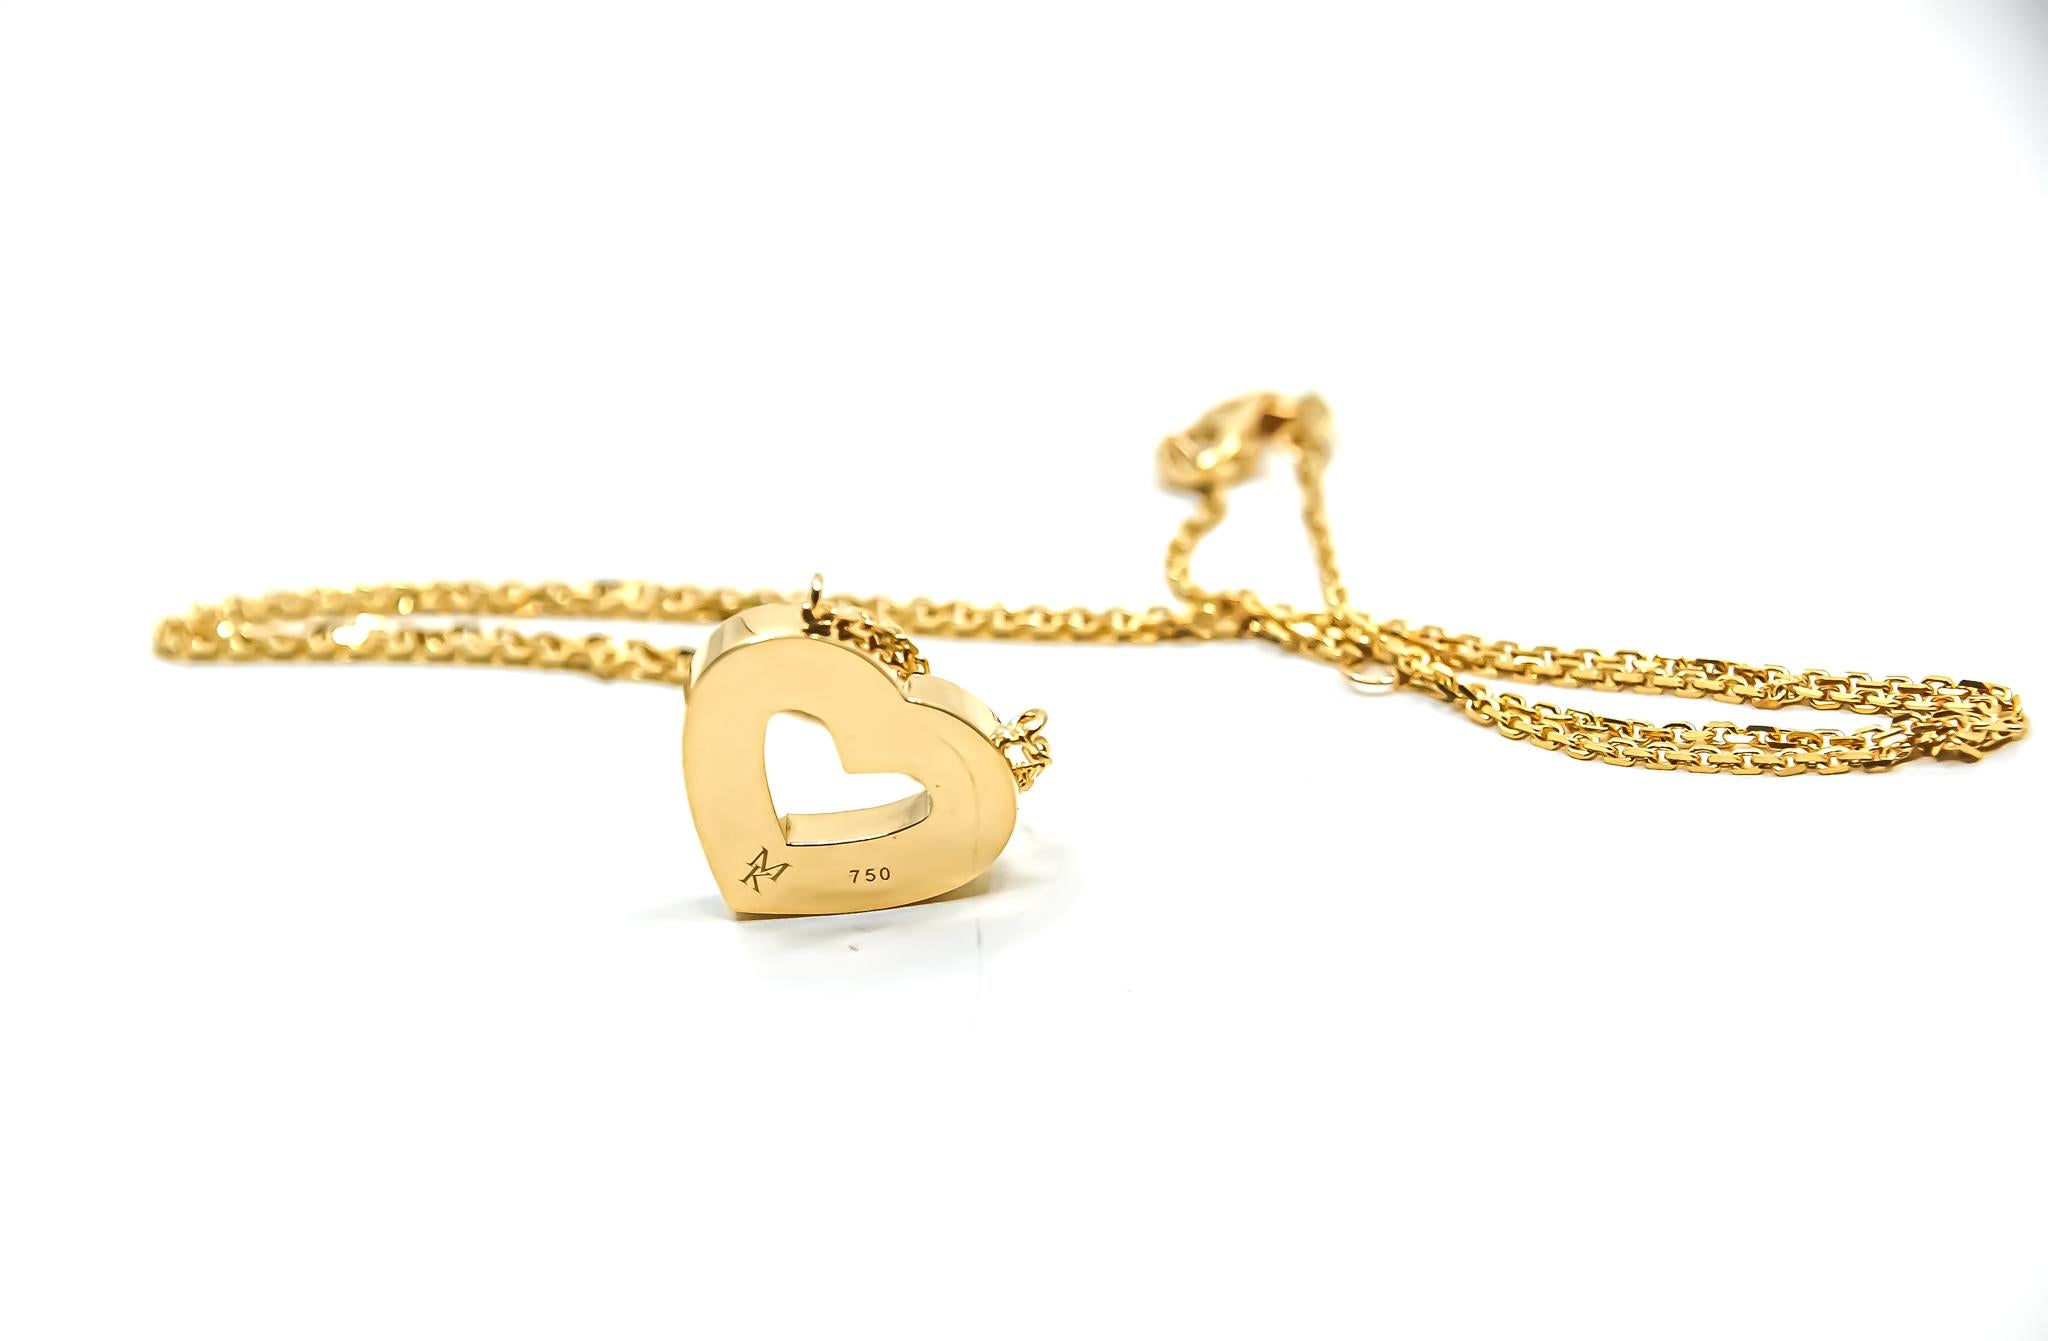 18kt solid yellow gold pendant necklace by Mohamad Kamra from the Heart Collection.

